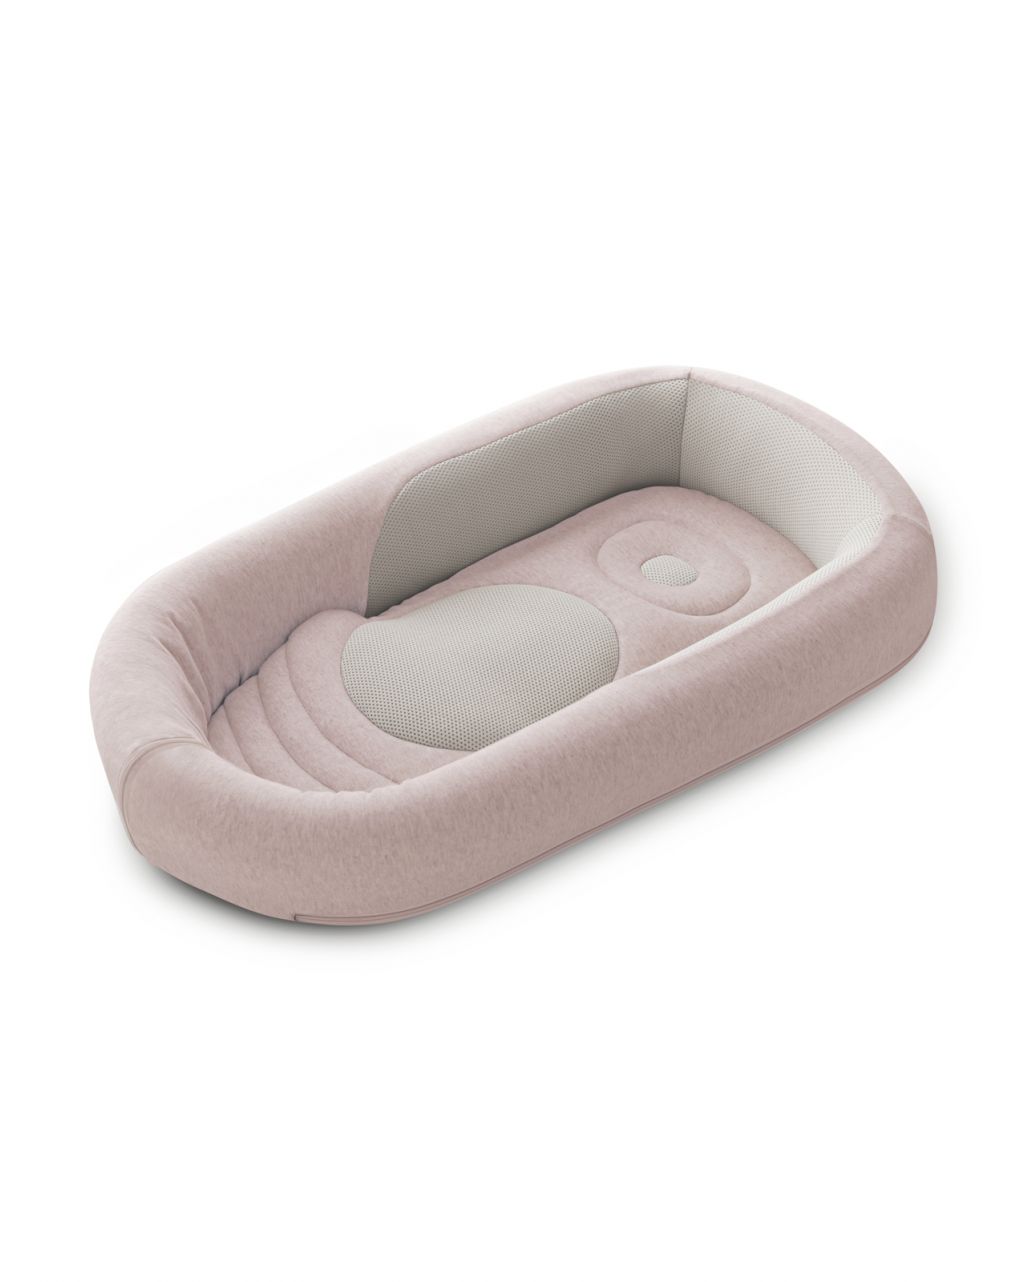 Welcome pod colore delicate pink - inglesina